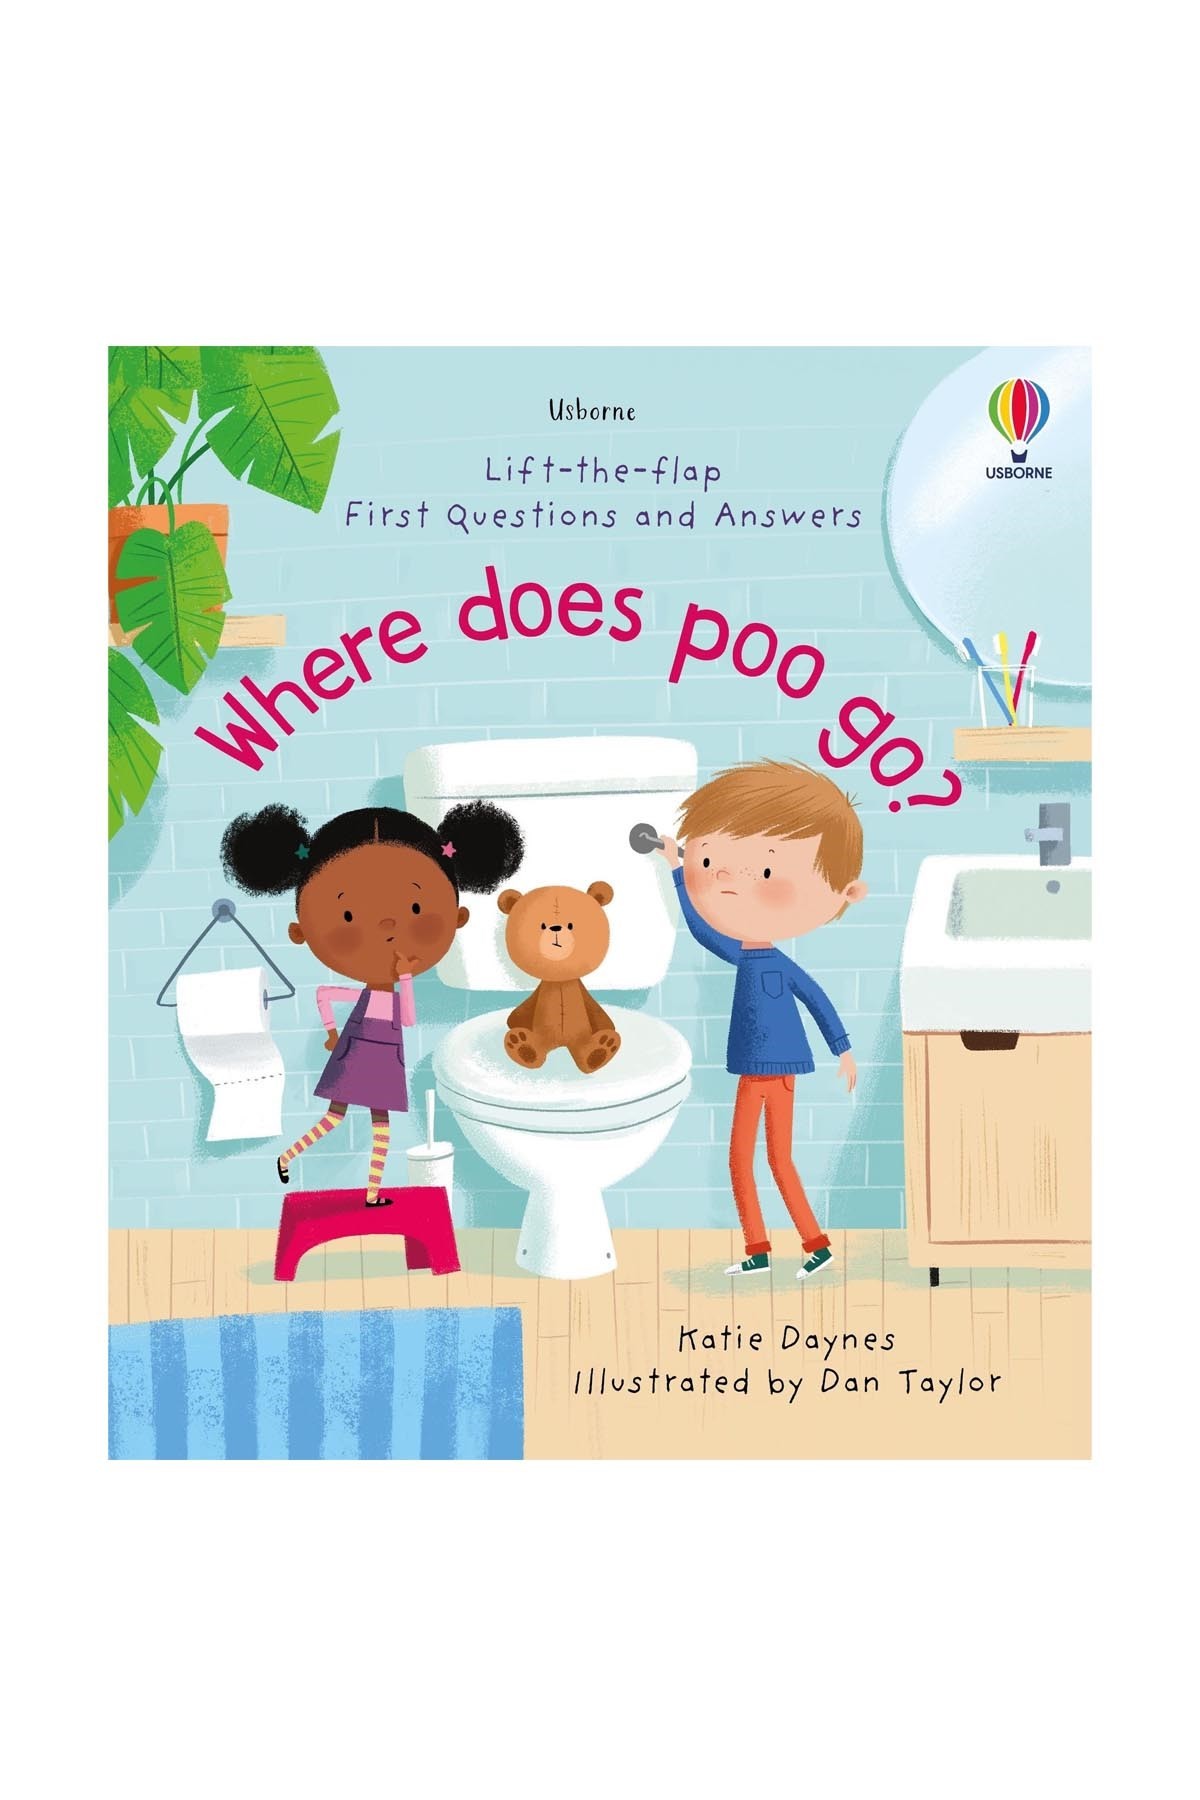 The Usborne Ltf First Q&A Where Does Poo Go?